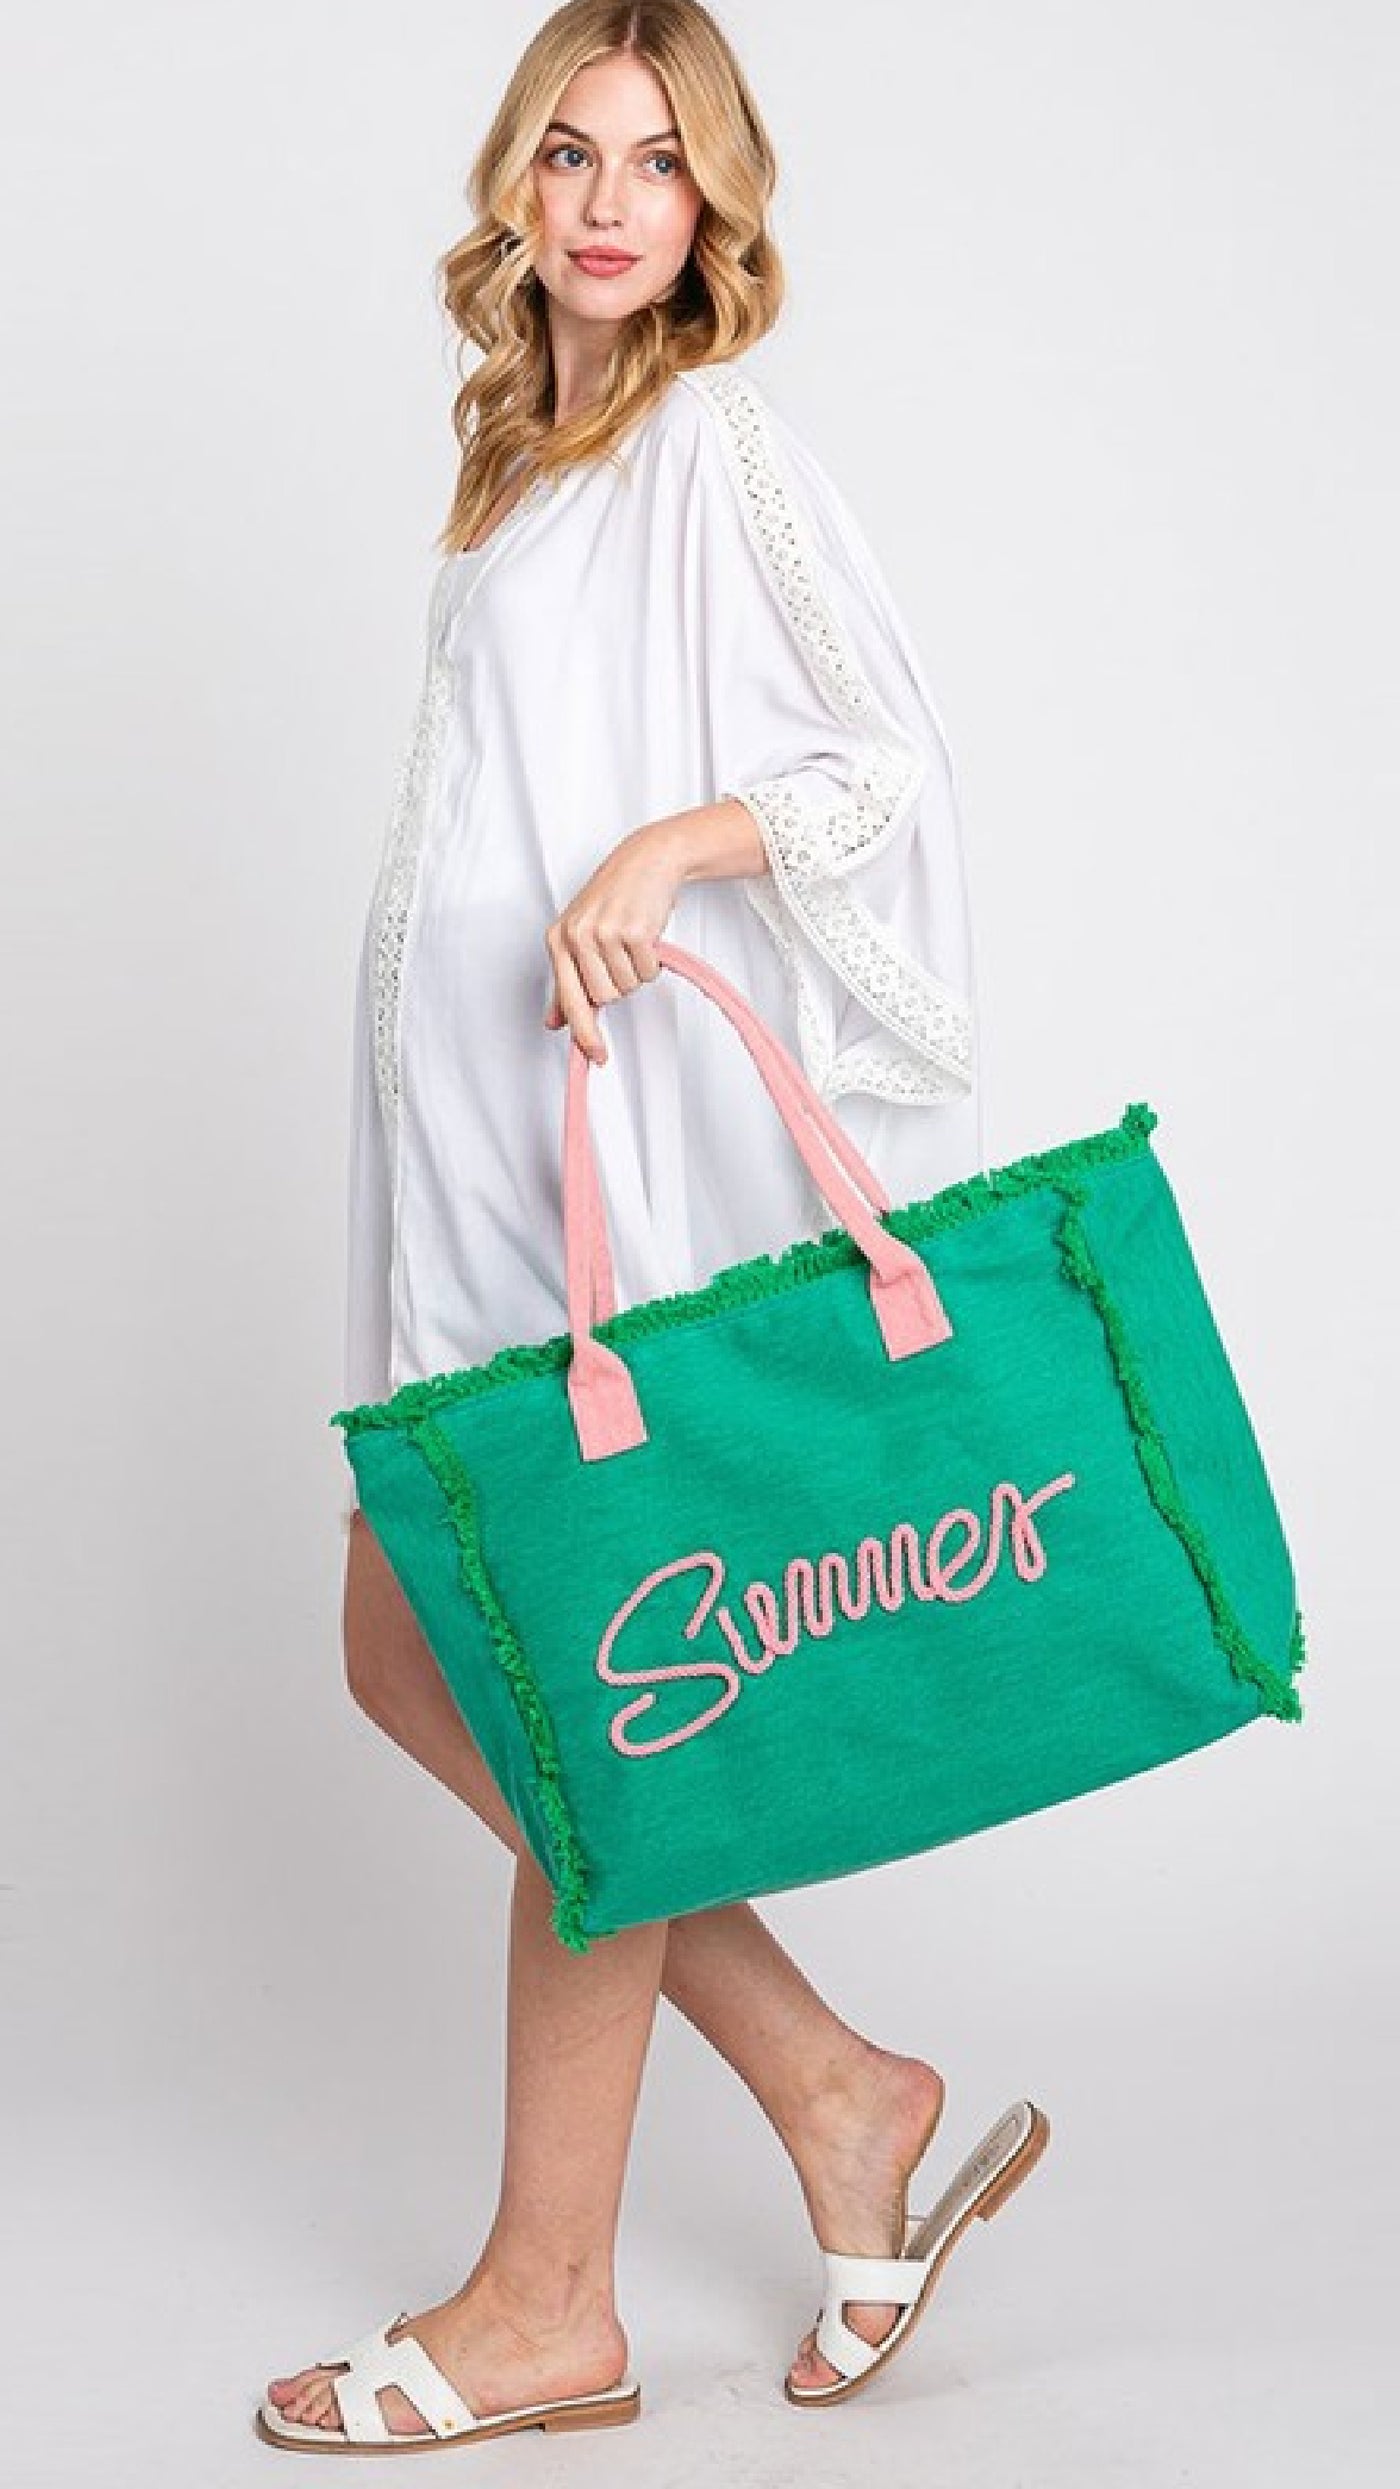 Summer Bag - Green - Piper and Hollow Boutique